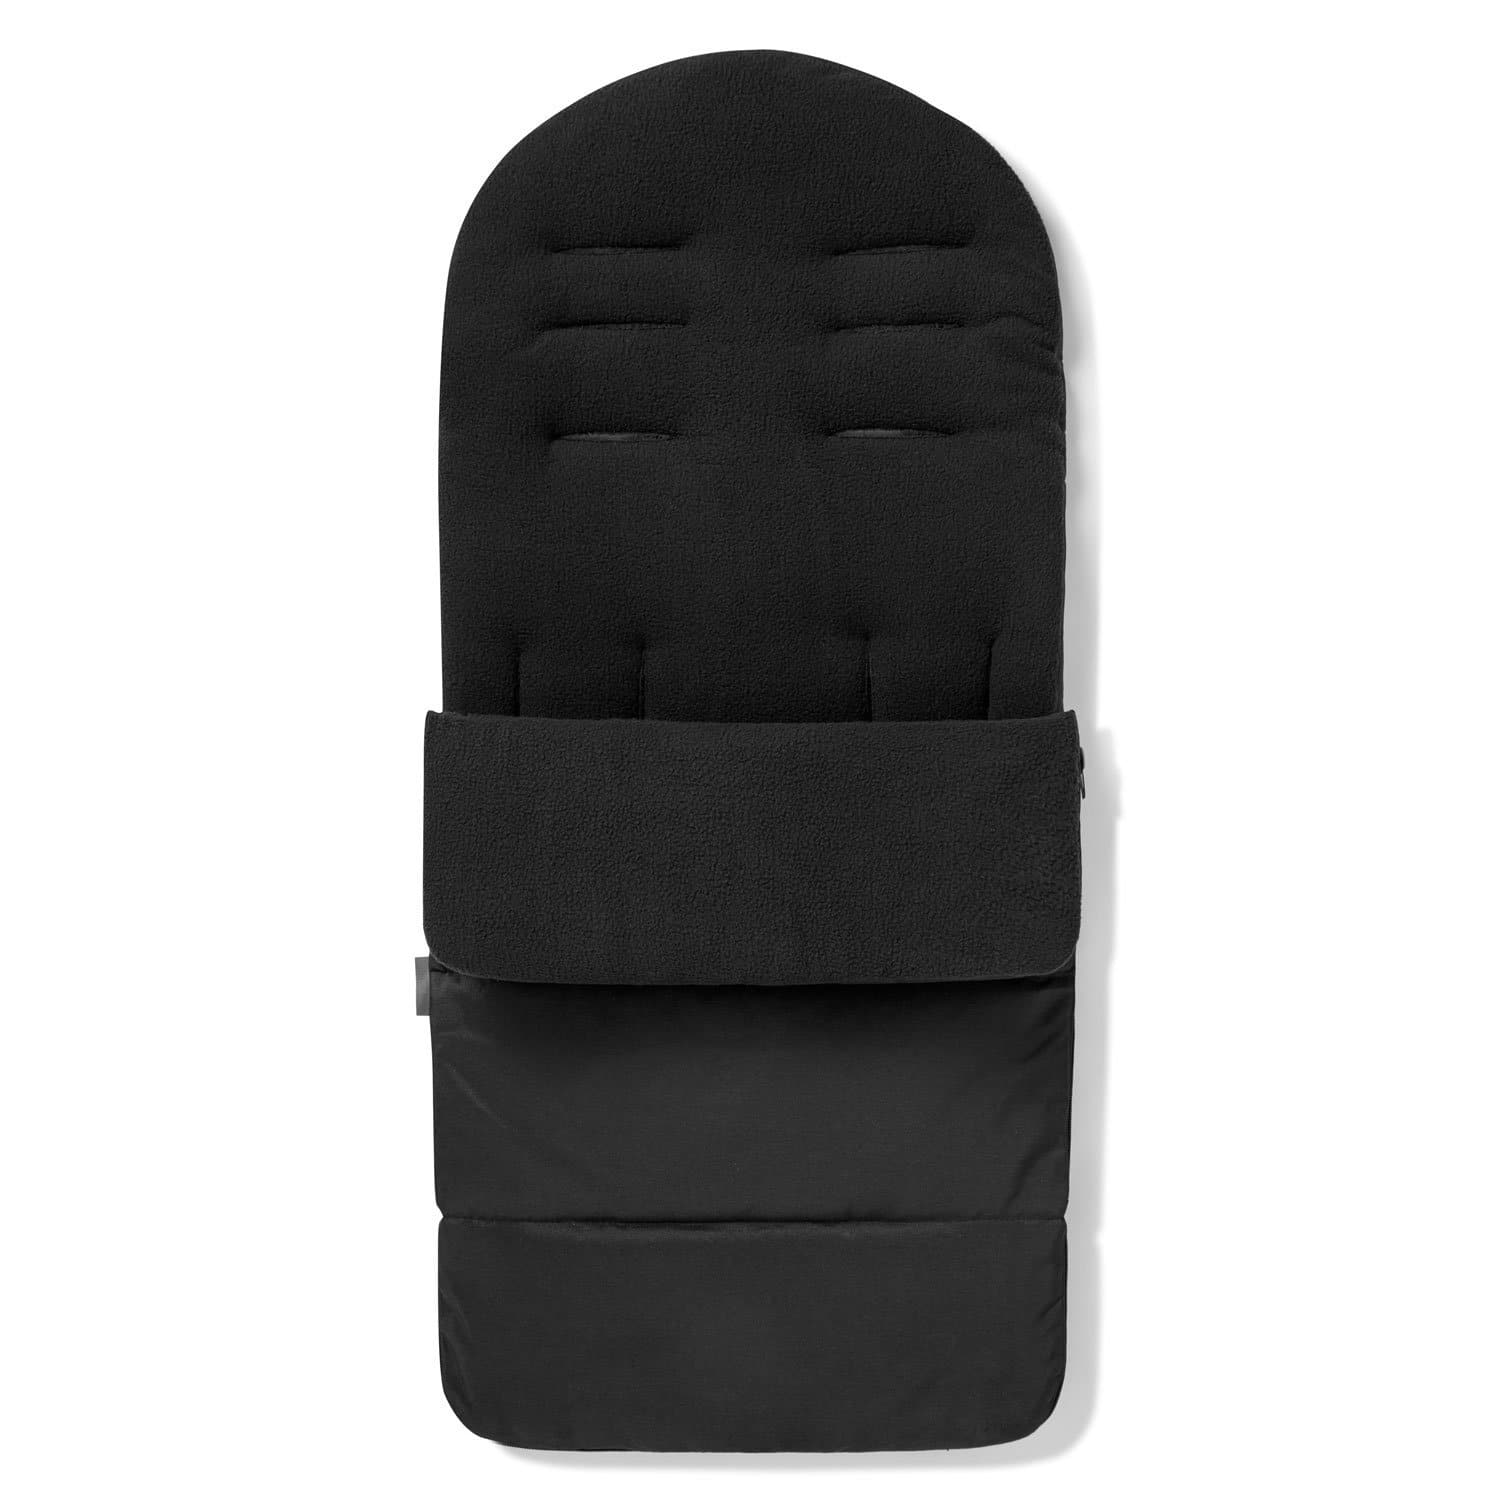 Premium Footmuff / Cosy Toes Compatible with BabySun - Black Jack / Fits All Models | For Your Little One